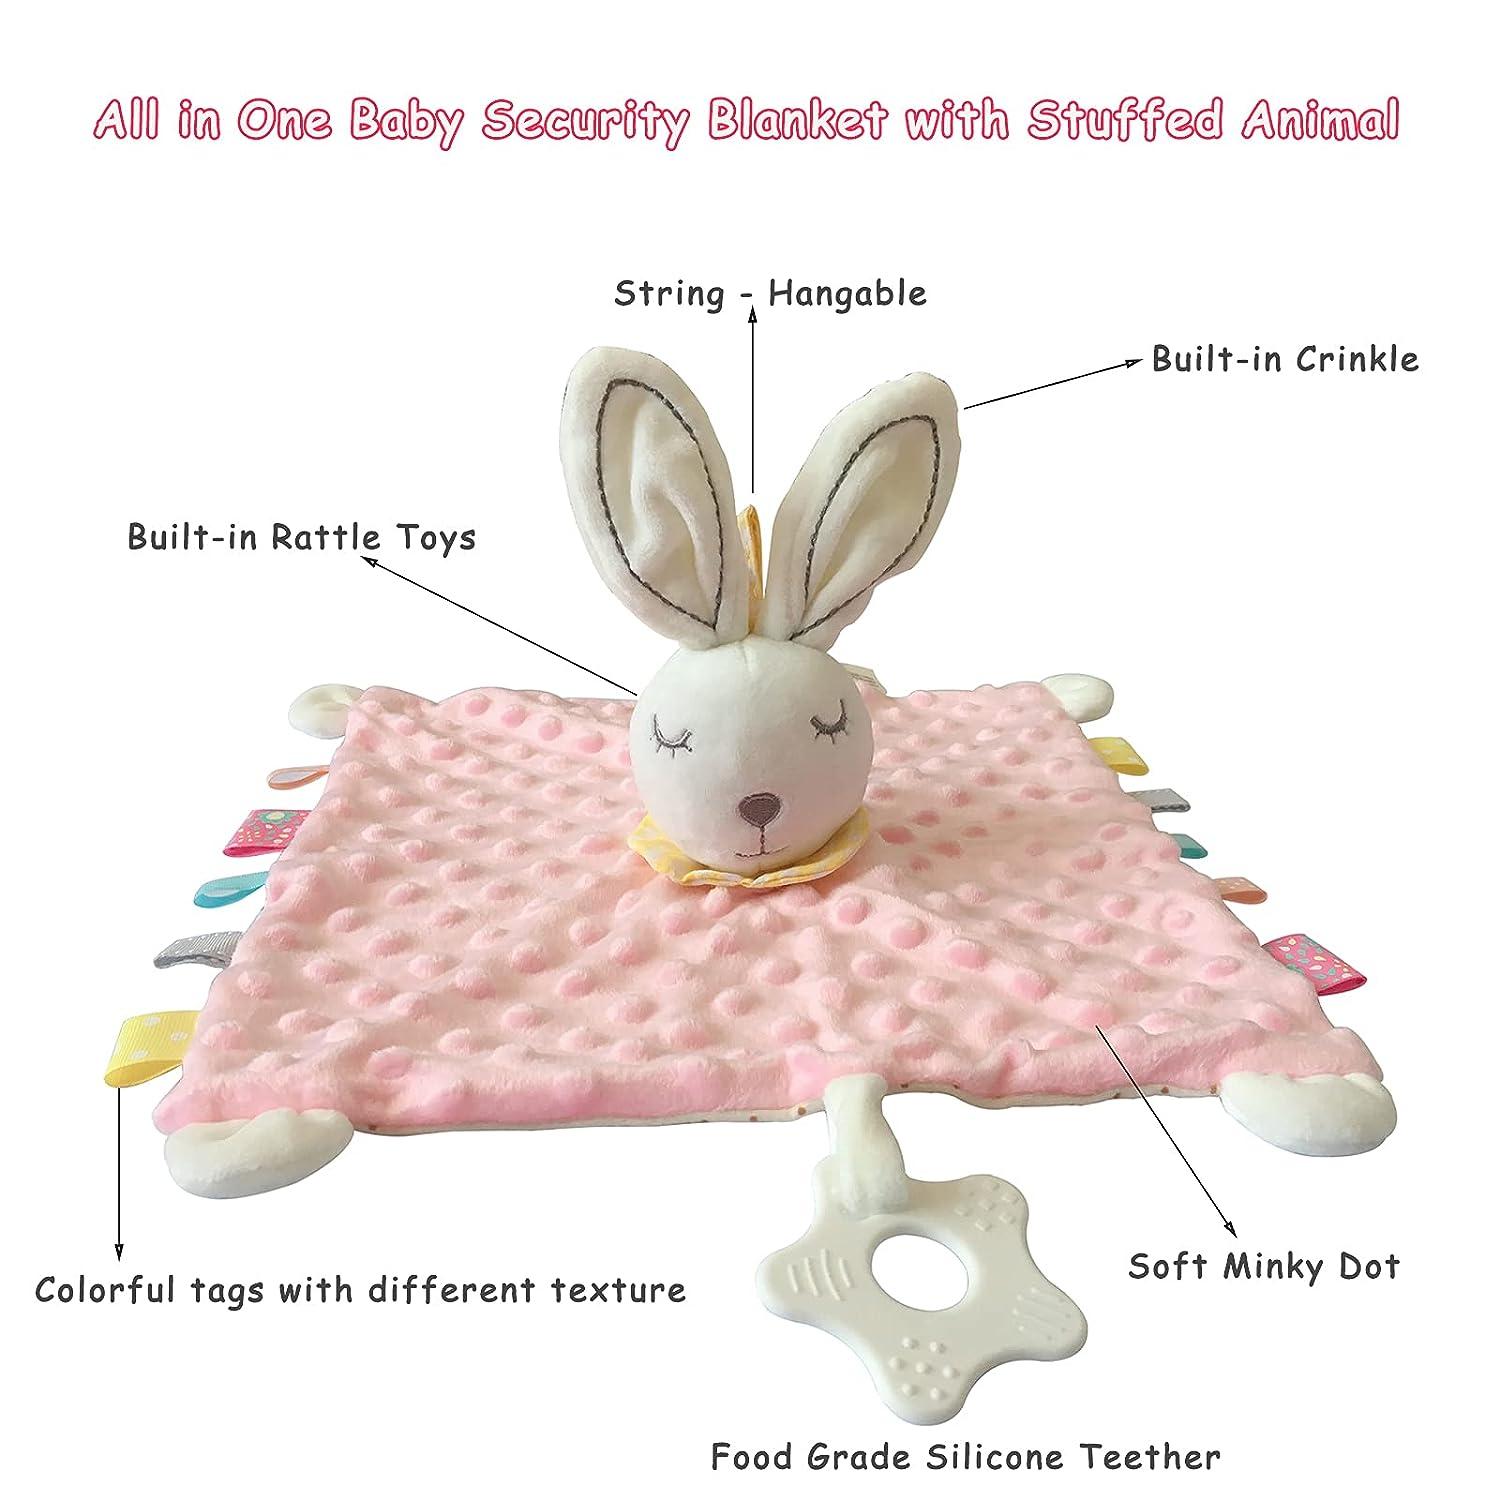 Organic Cotton Baby Toys, Rattles, and Security Blankets